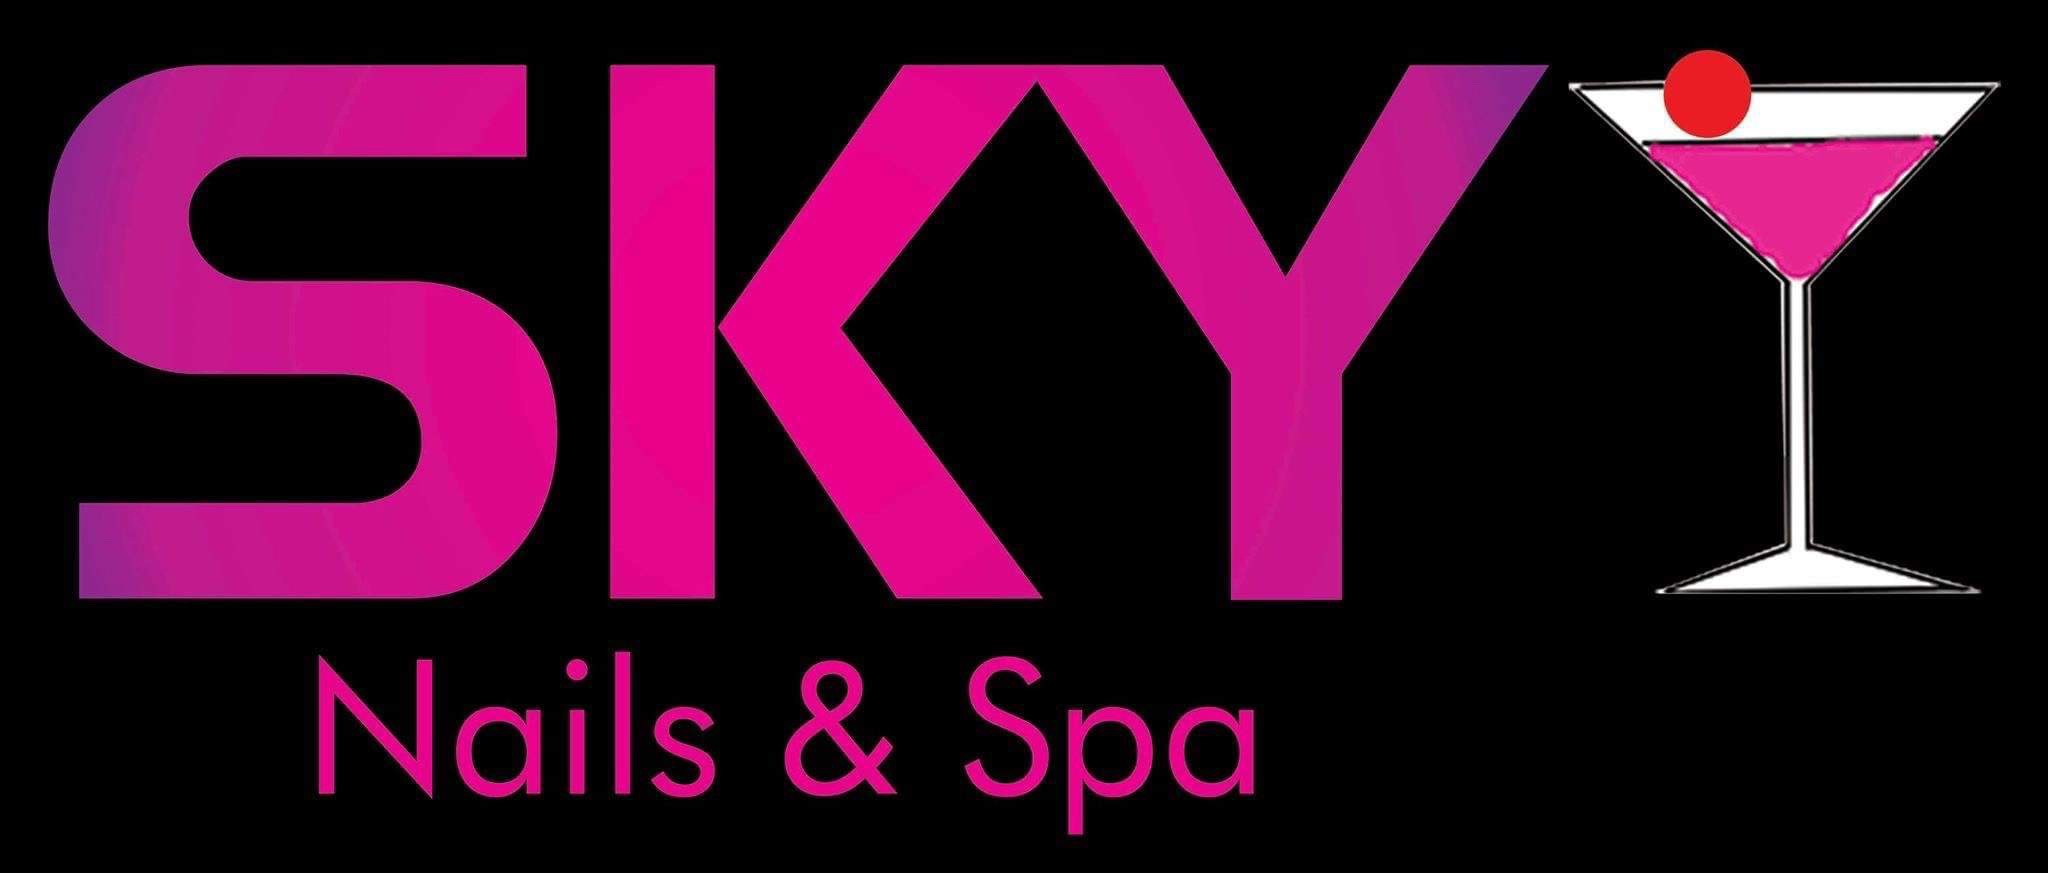 Best Nail Salons in Milwaukee. Nearby on Booksy!